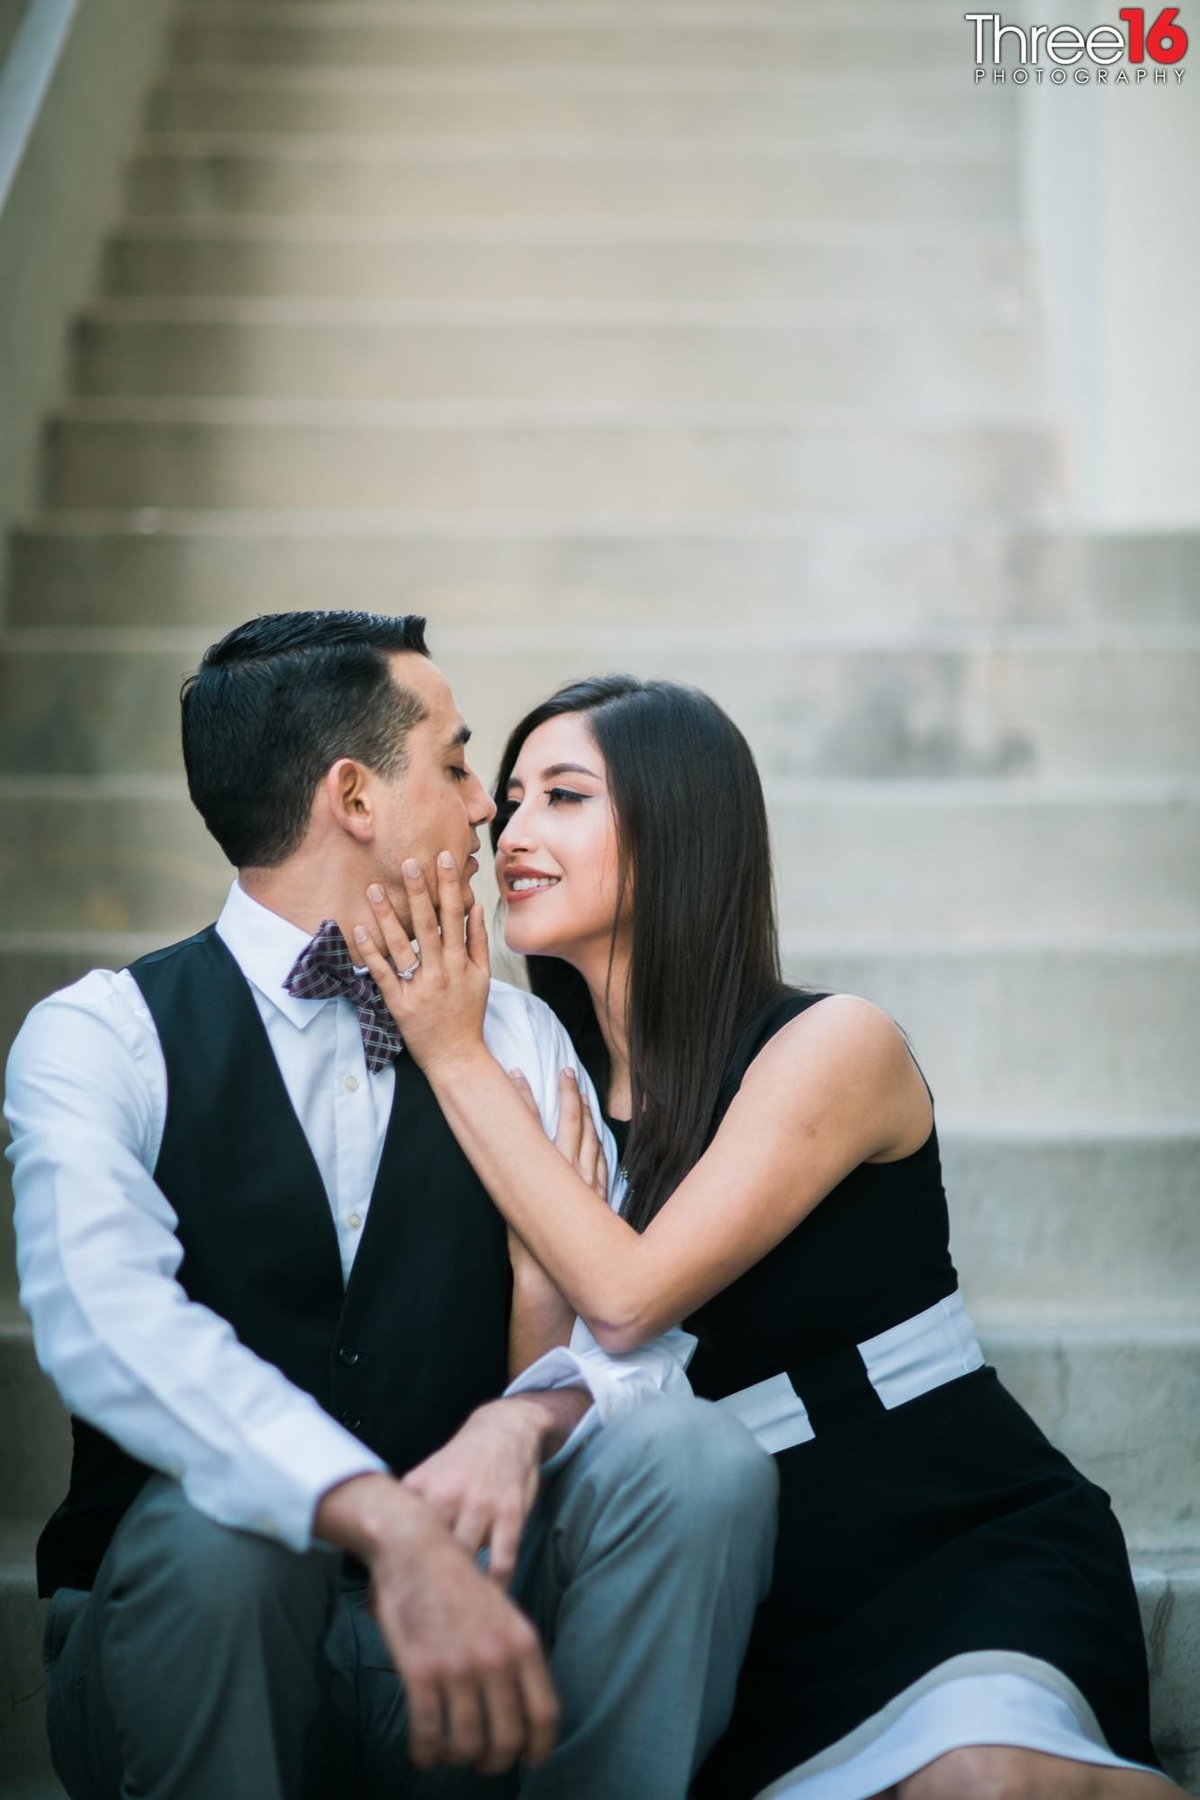 Bride to be places her hand on her Groom's face as they sit together on the stairs